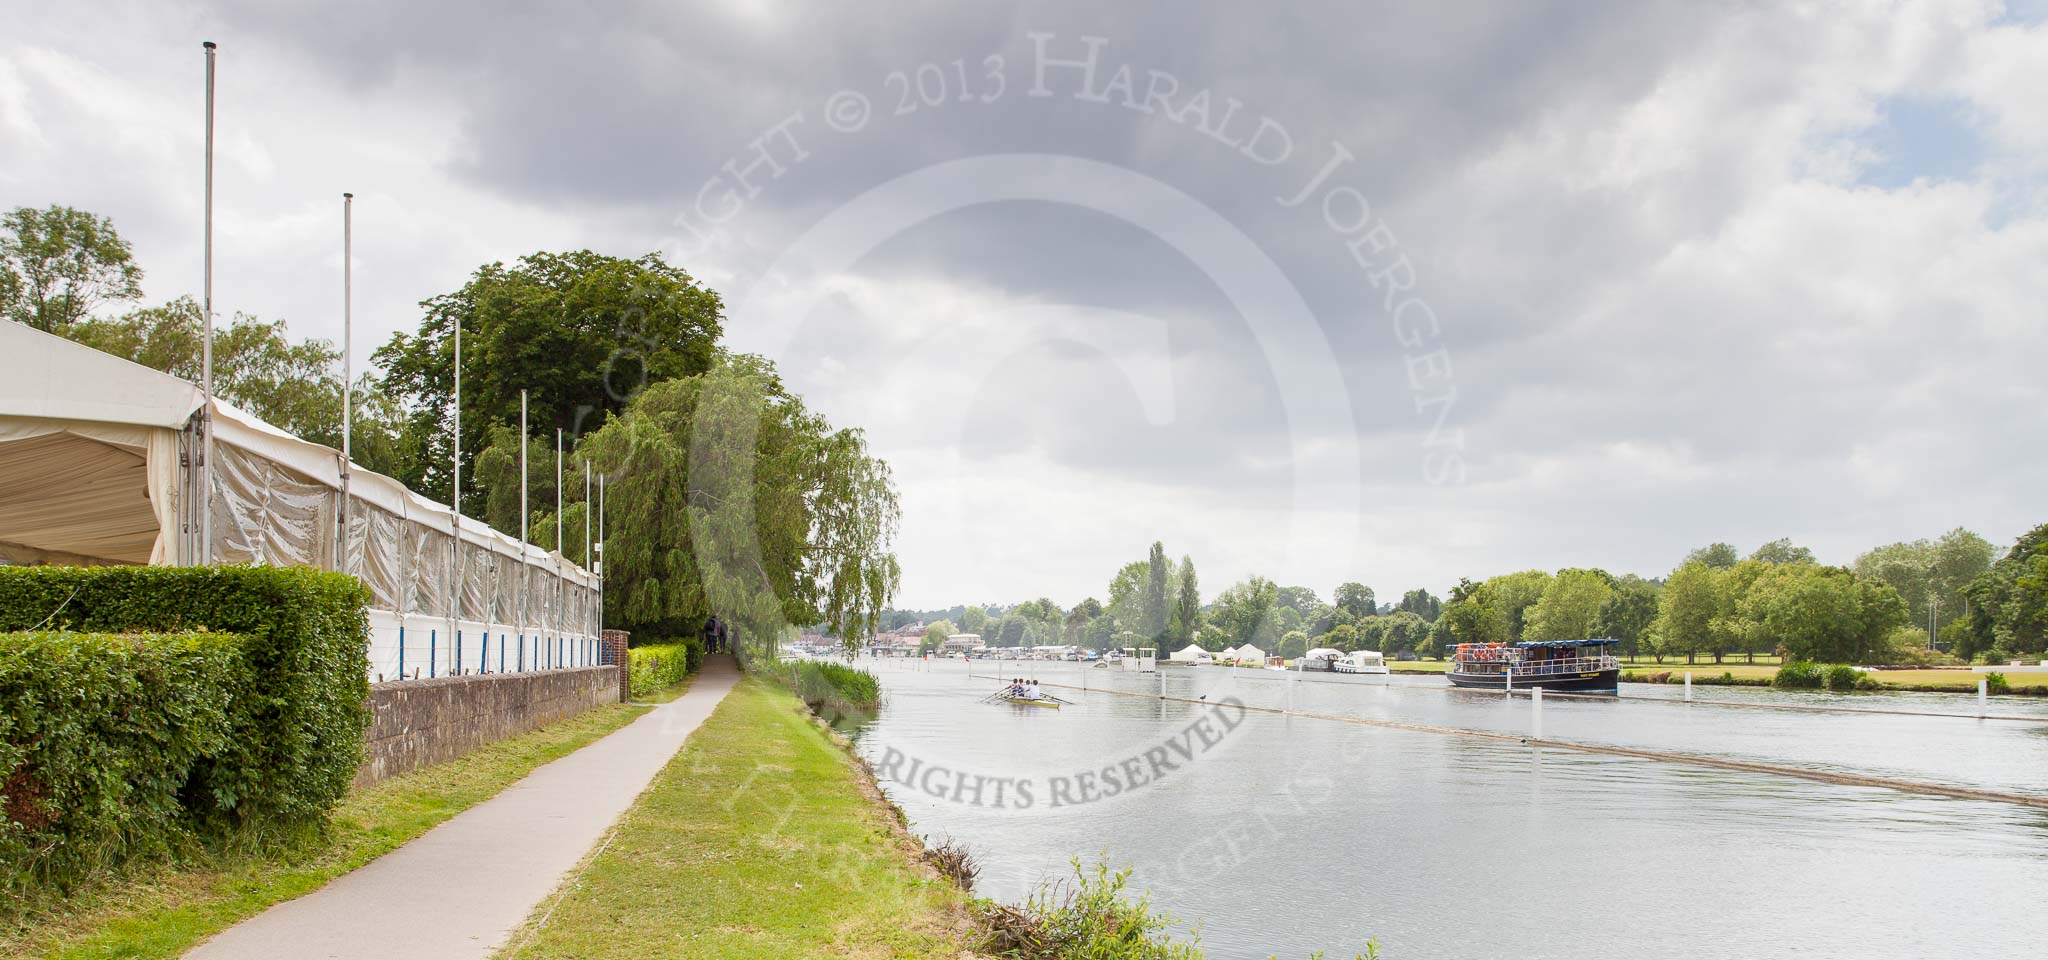 Henley Royal Regatta 2013 (Monday): Preparations for the regatta - tents on the eastern side of the Thames..
River Thames between Henley and Temple Island,
Henley-on-Thames,
Berkshire,
United Kingdom,
on 01 July 2013 at 14:39, image #15